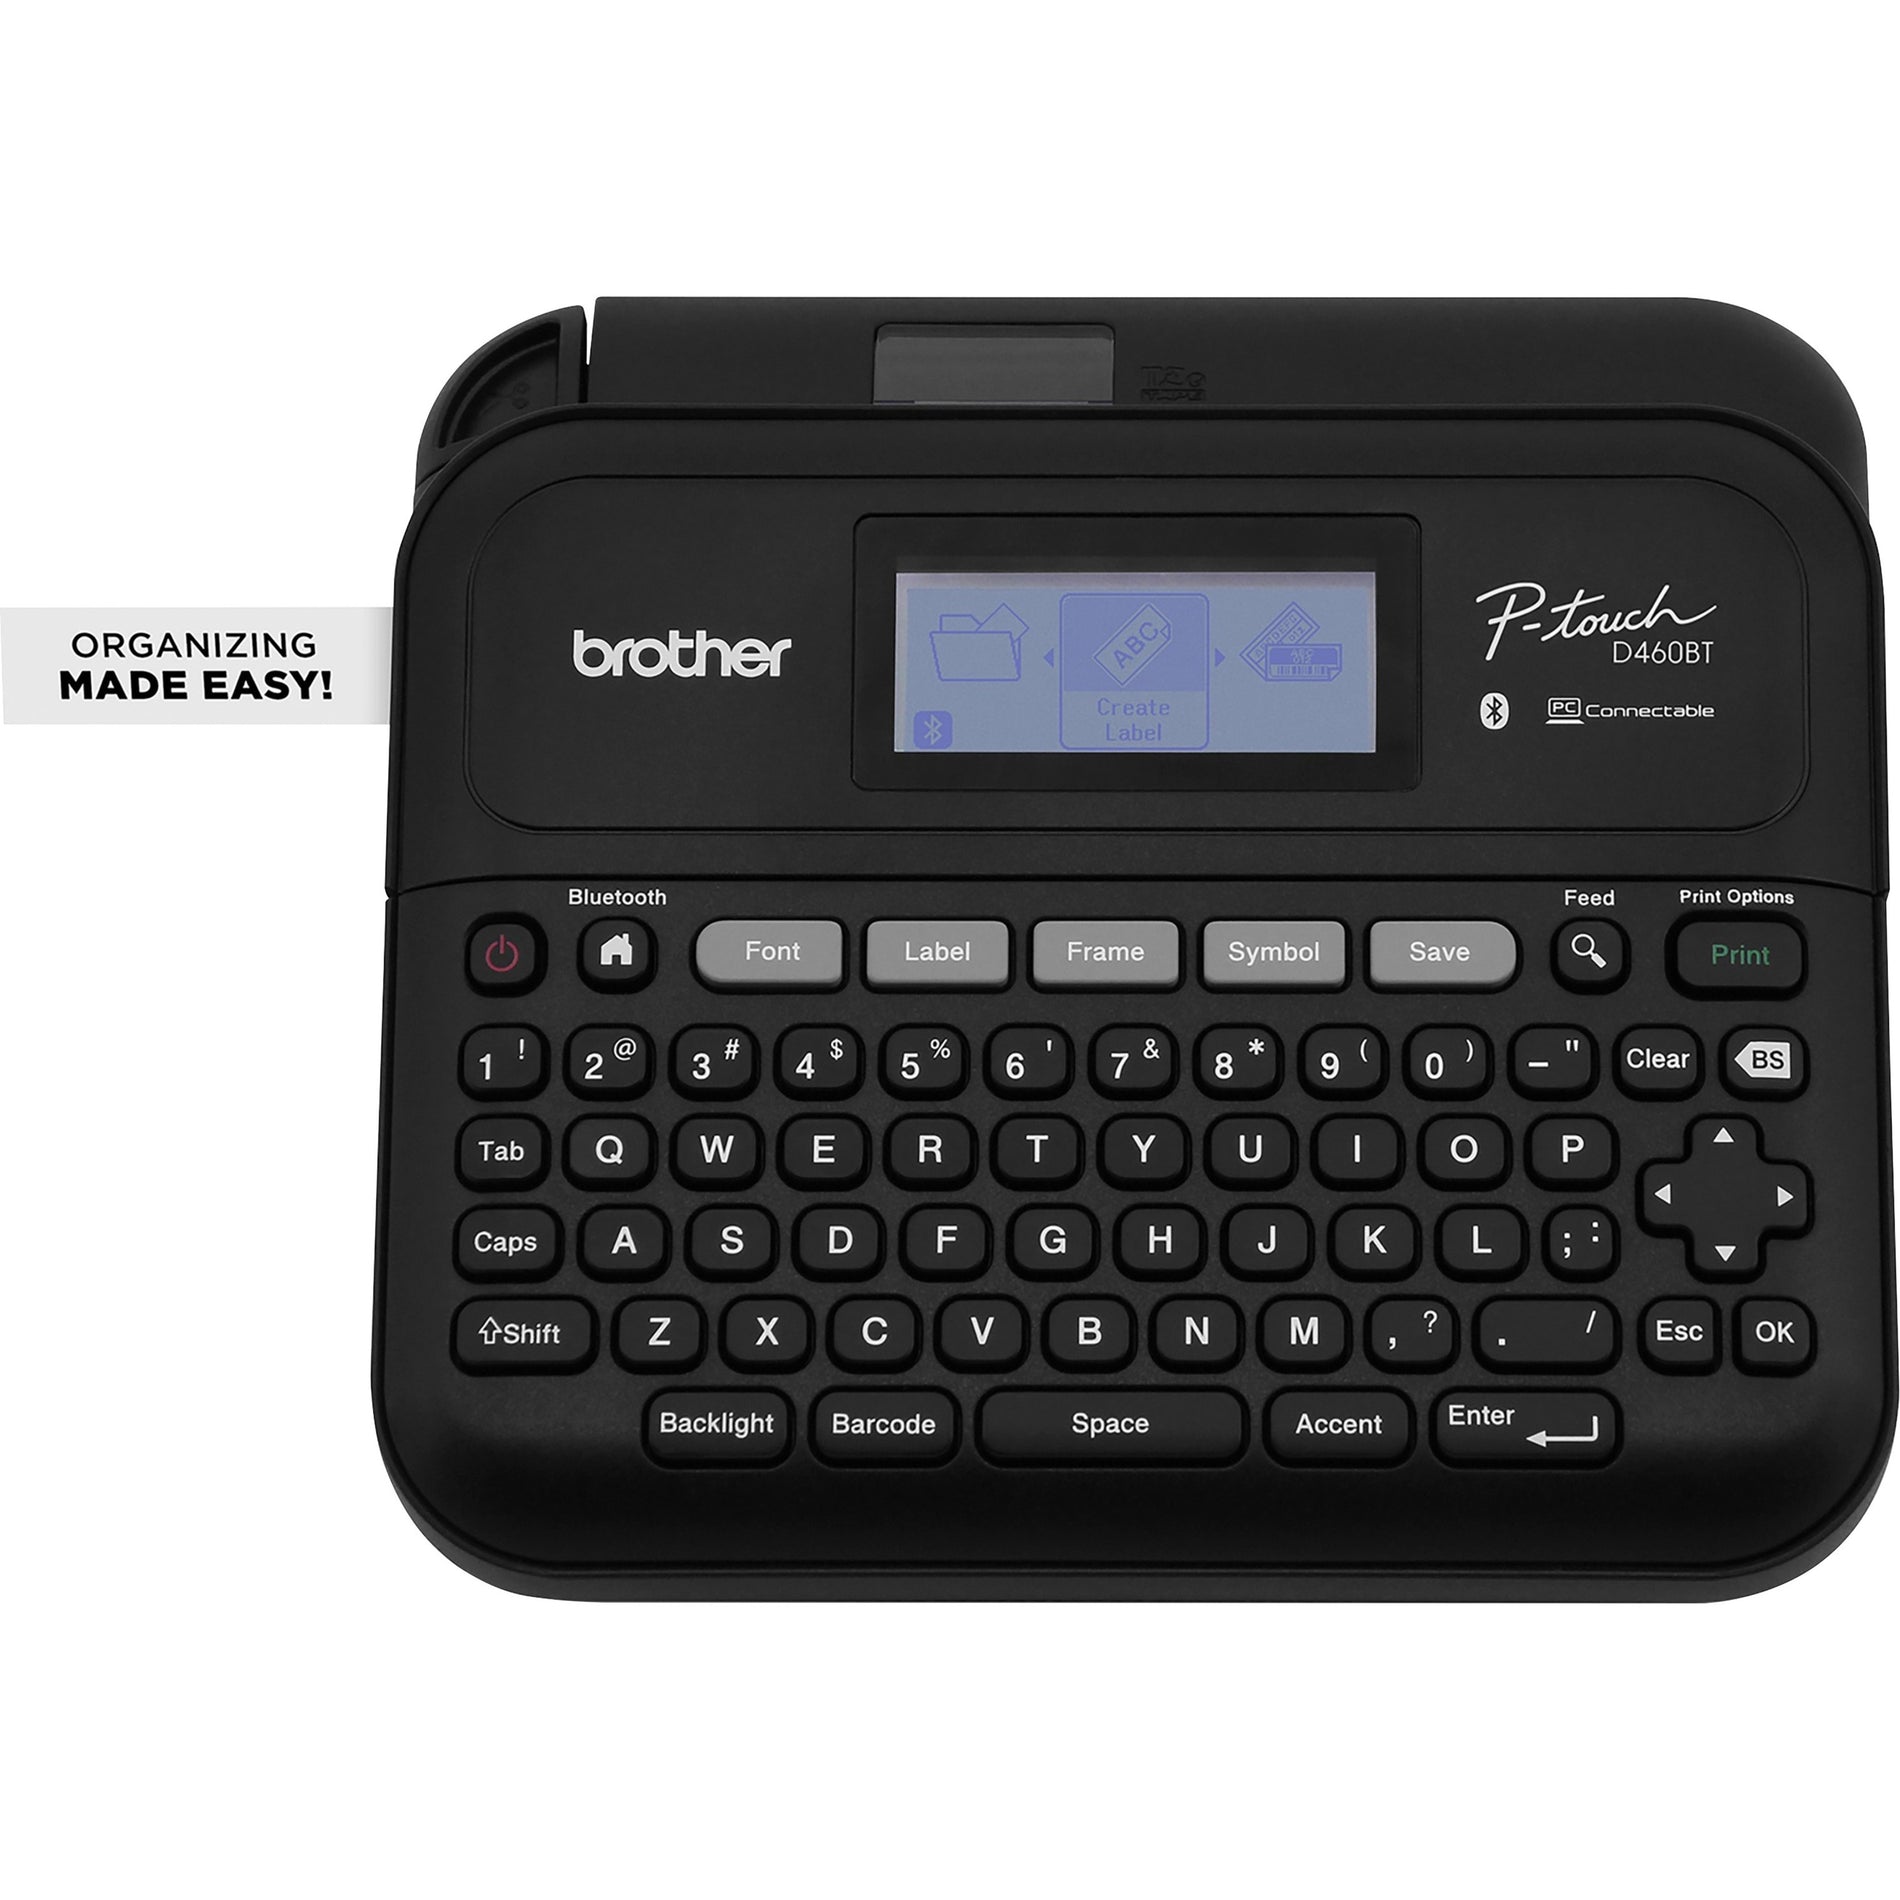 Brother PTD460BT P-Touch PT-D460BT Label Printer Gray, QWERTY, Barcode Printing, Auto Power Off